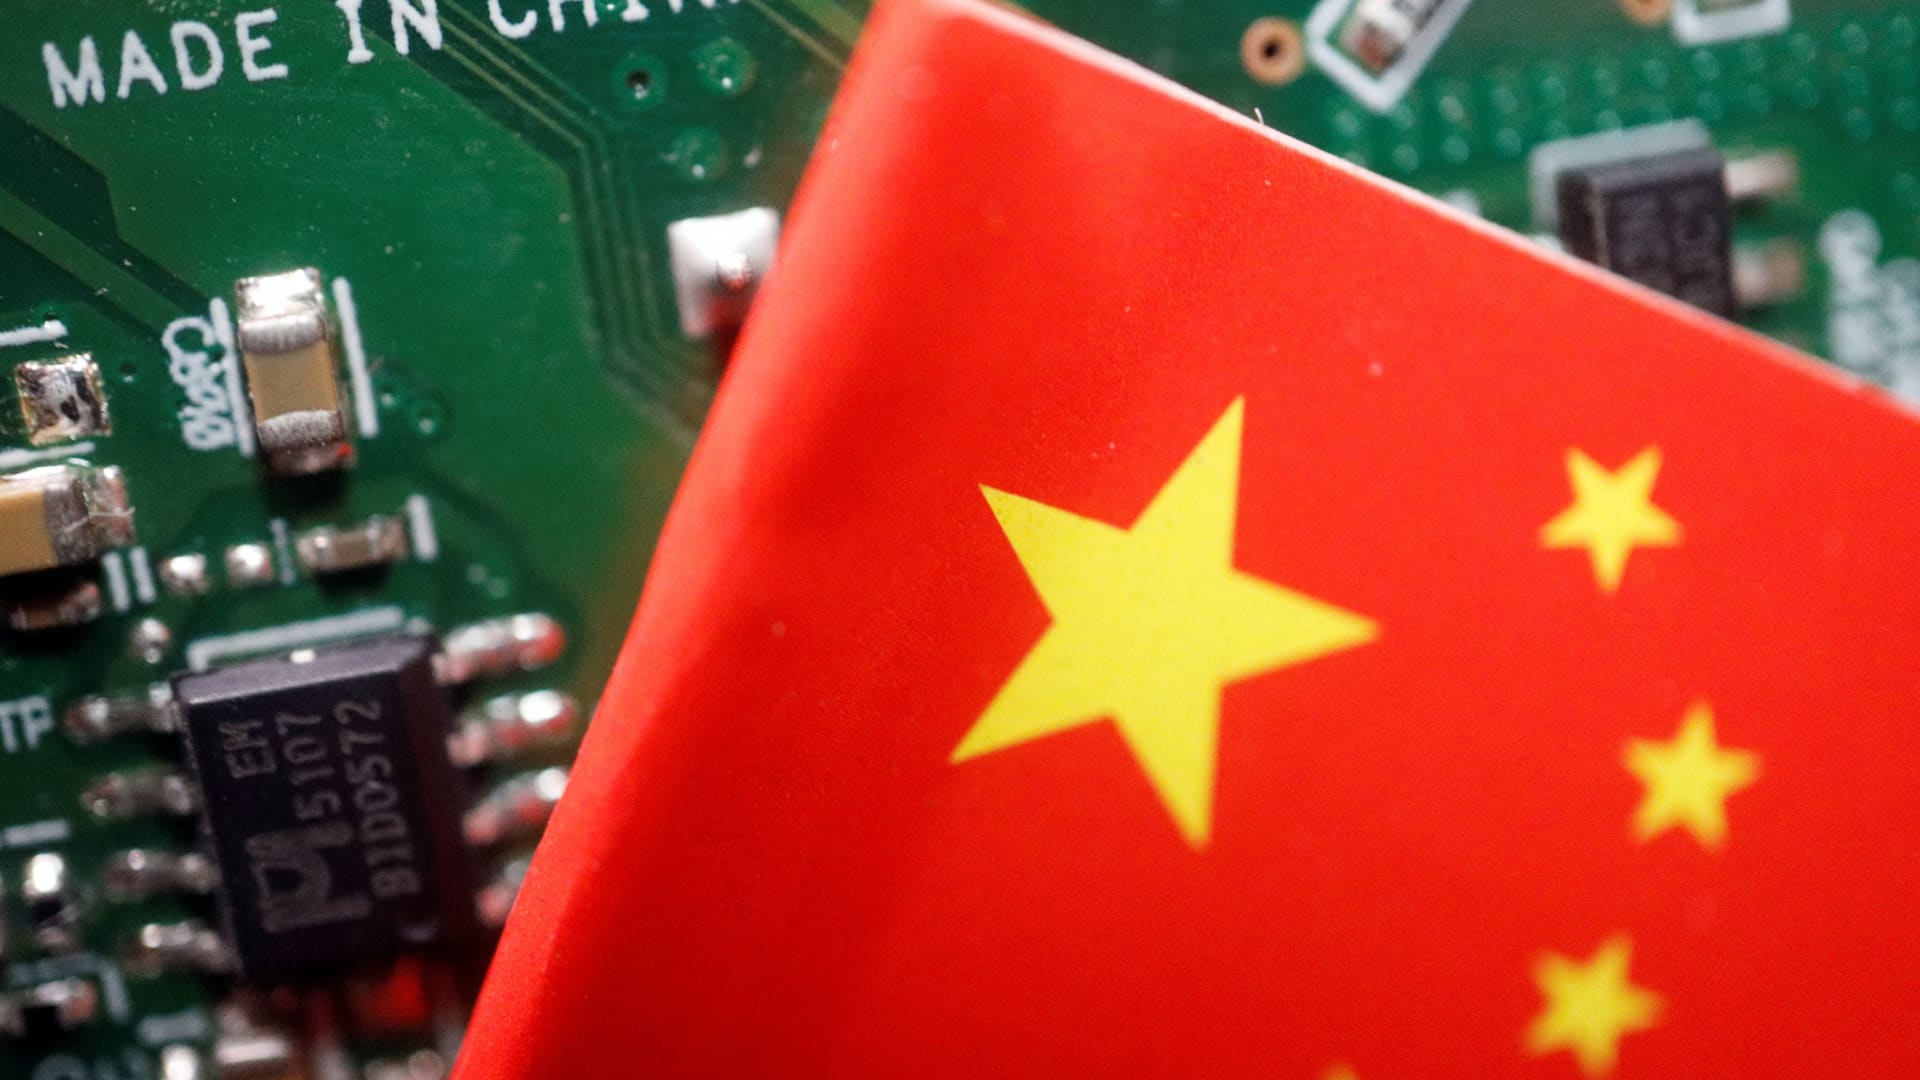 China says it told the U.S. and Europe about the export controls in advance